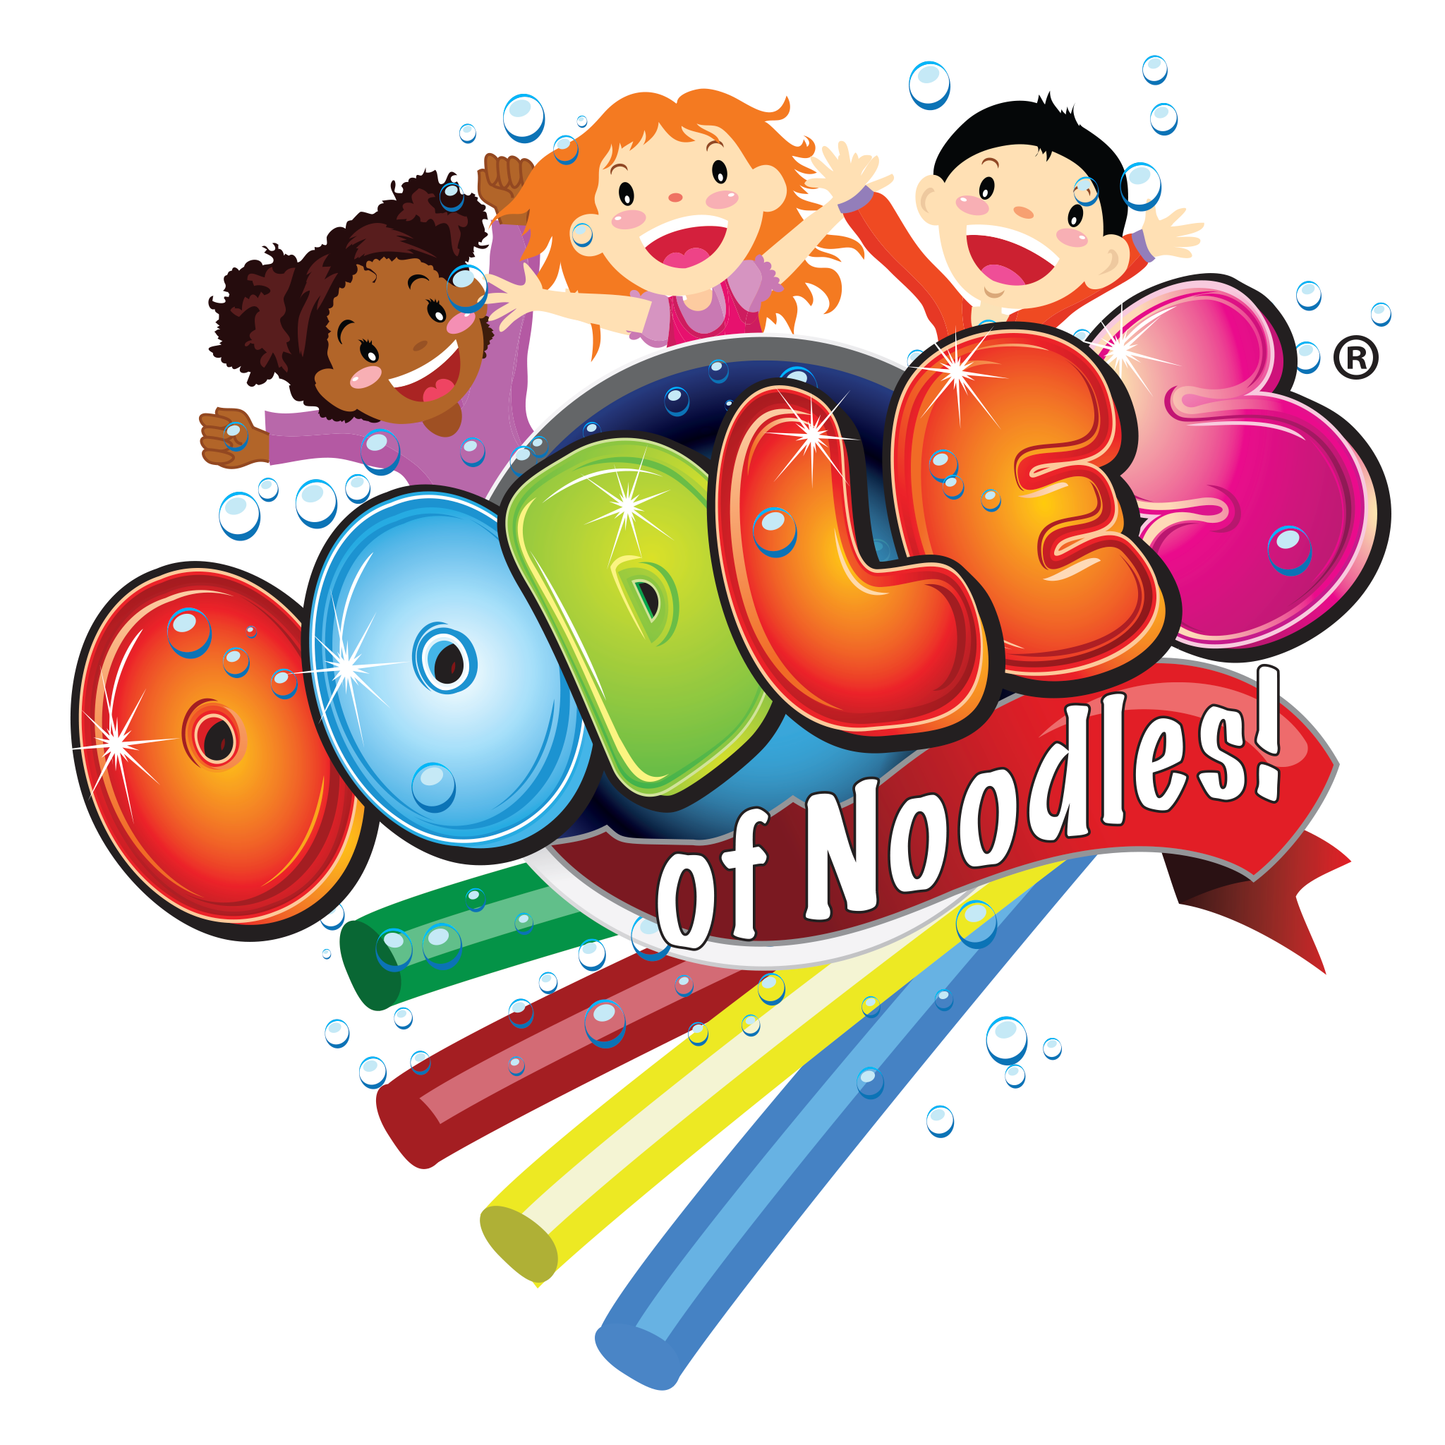 Oodles of Noodles Bits - Great for Crafts or Play